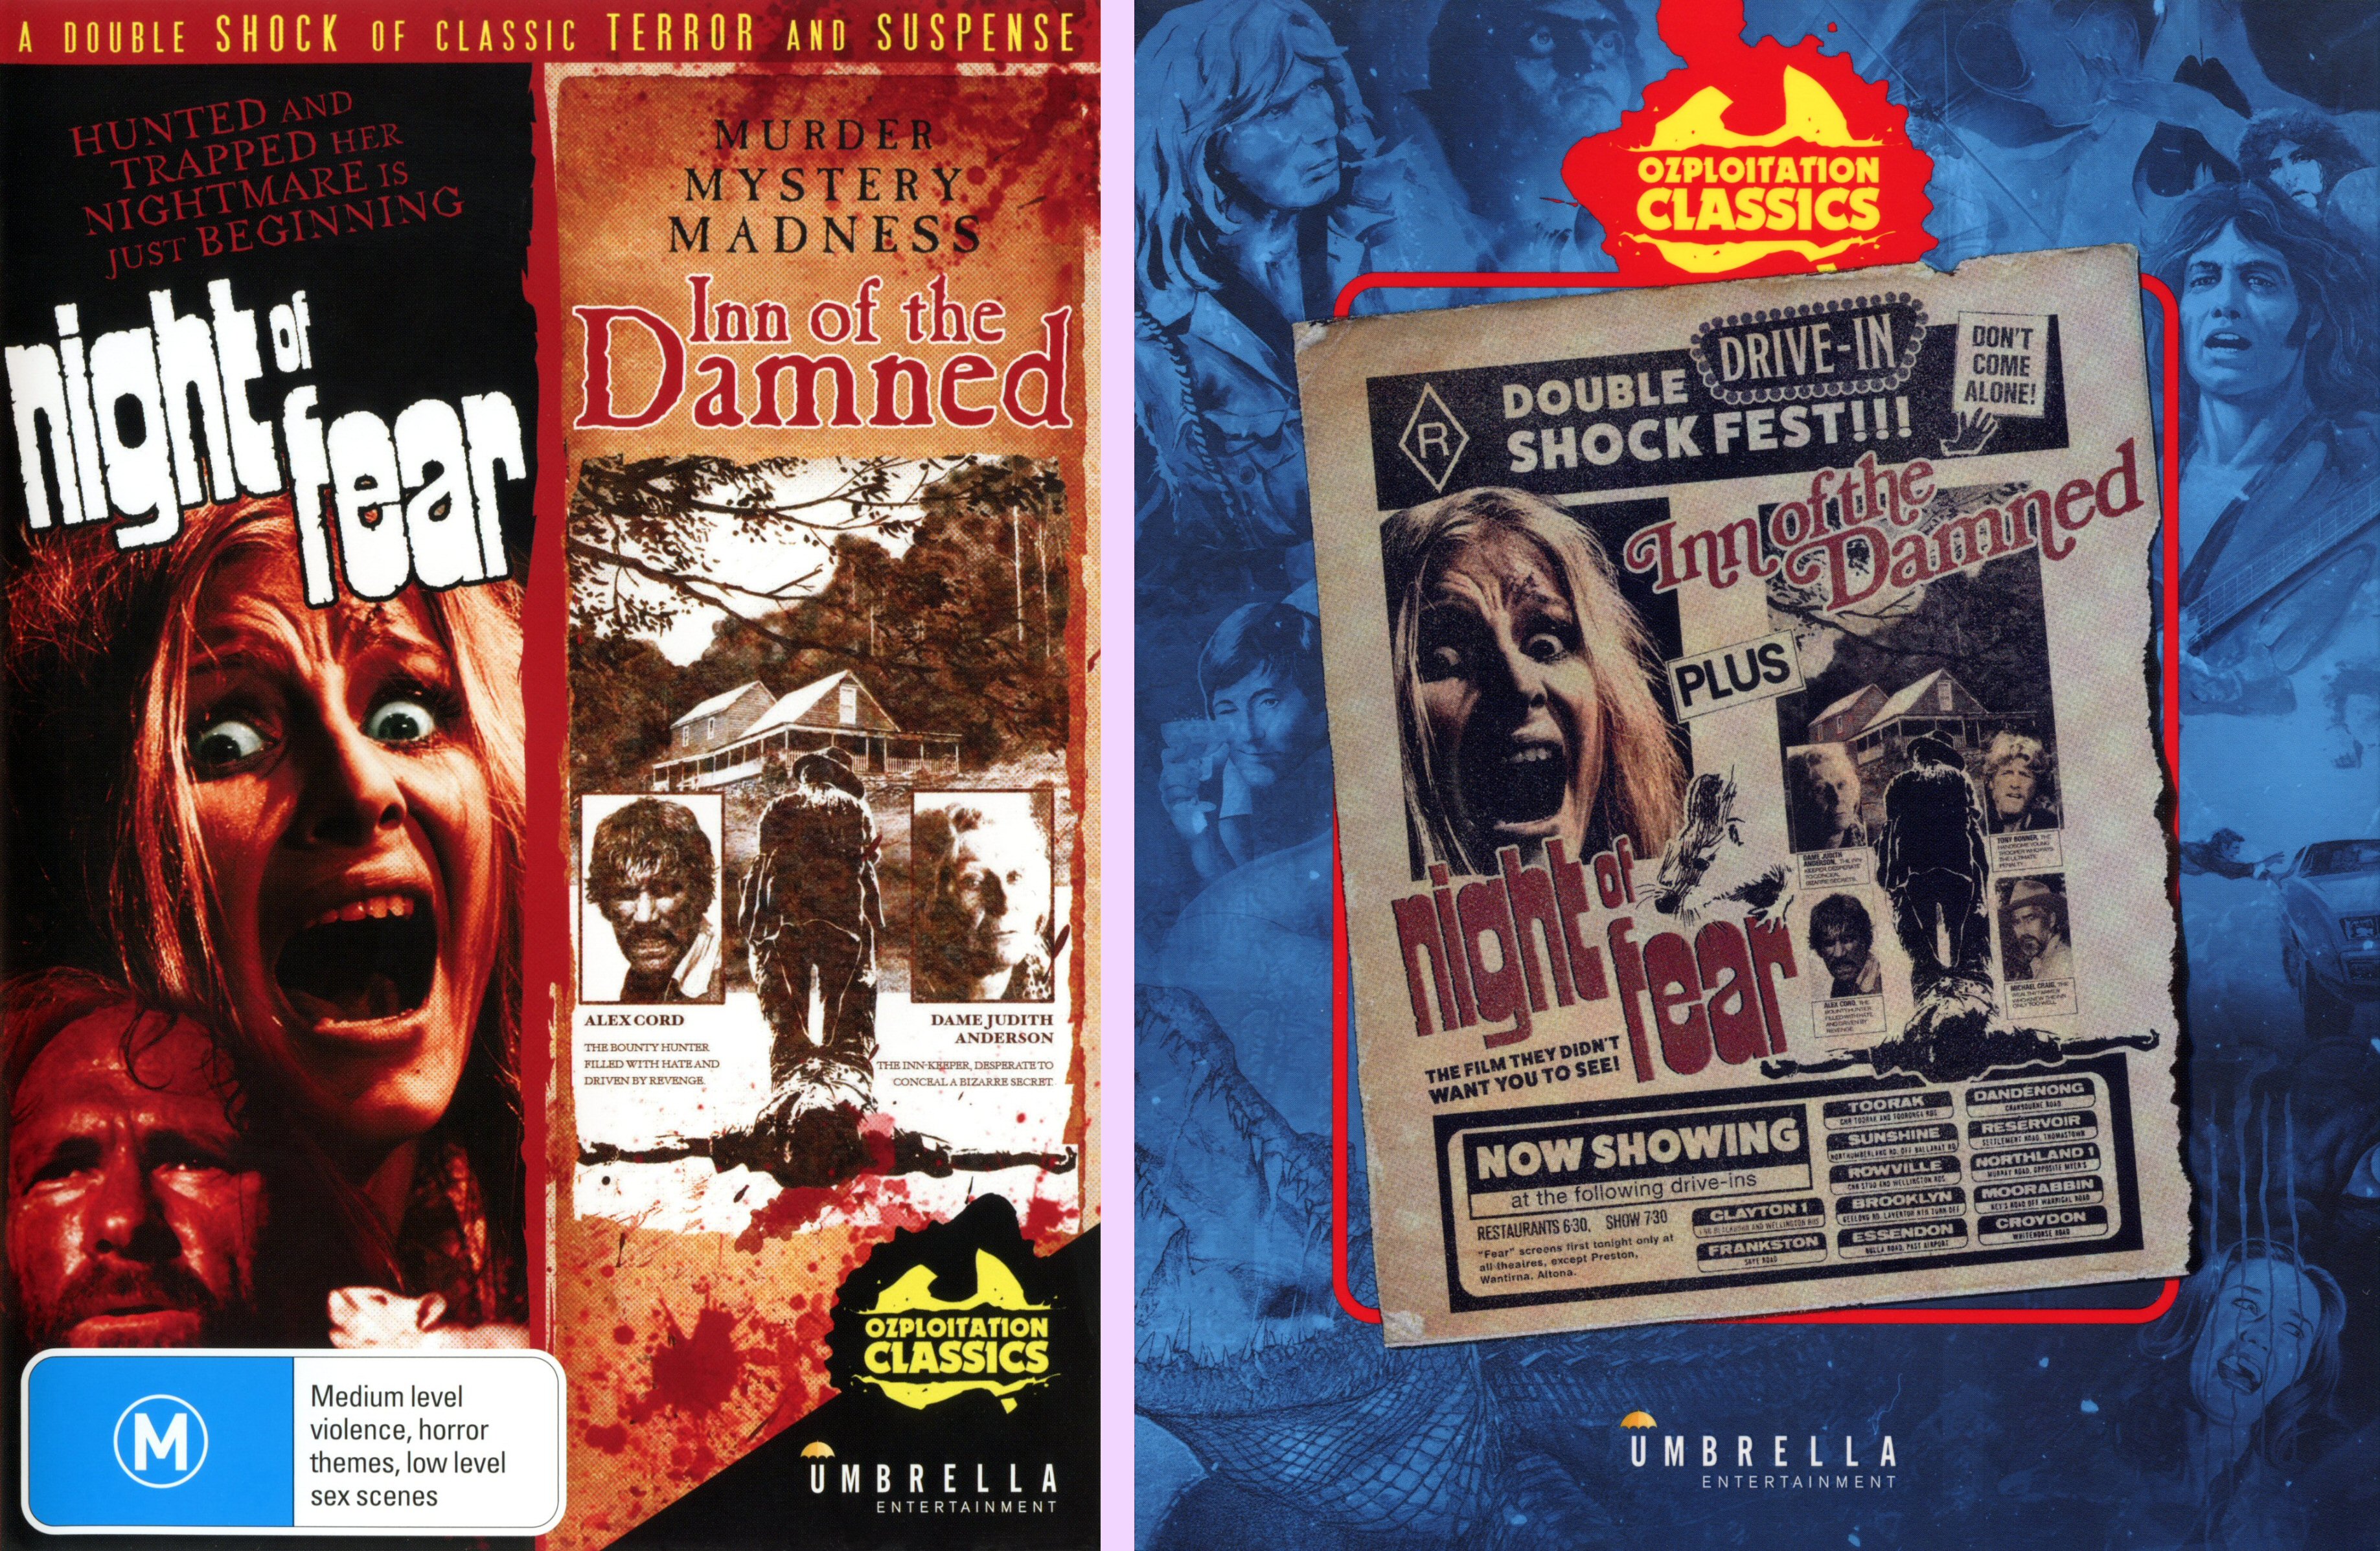 DVD Exotica Ozploitation Classics Inn Of the Damned and Night Of Fear pic